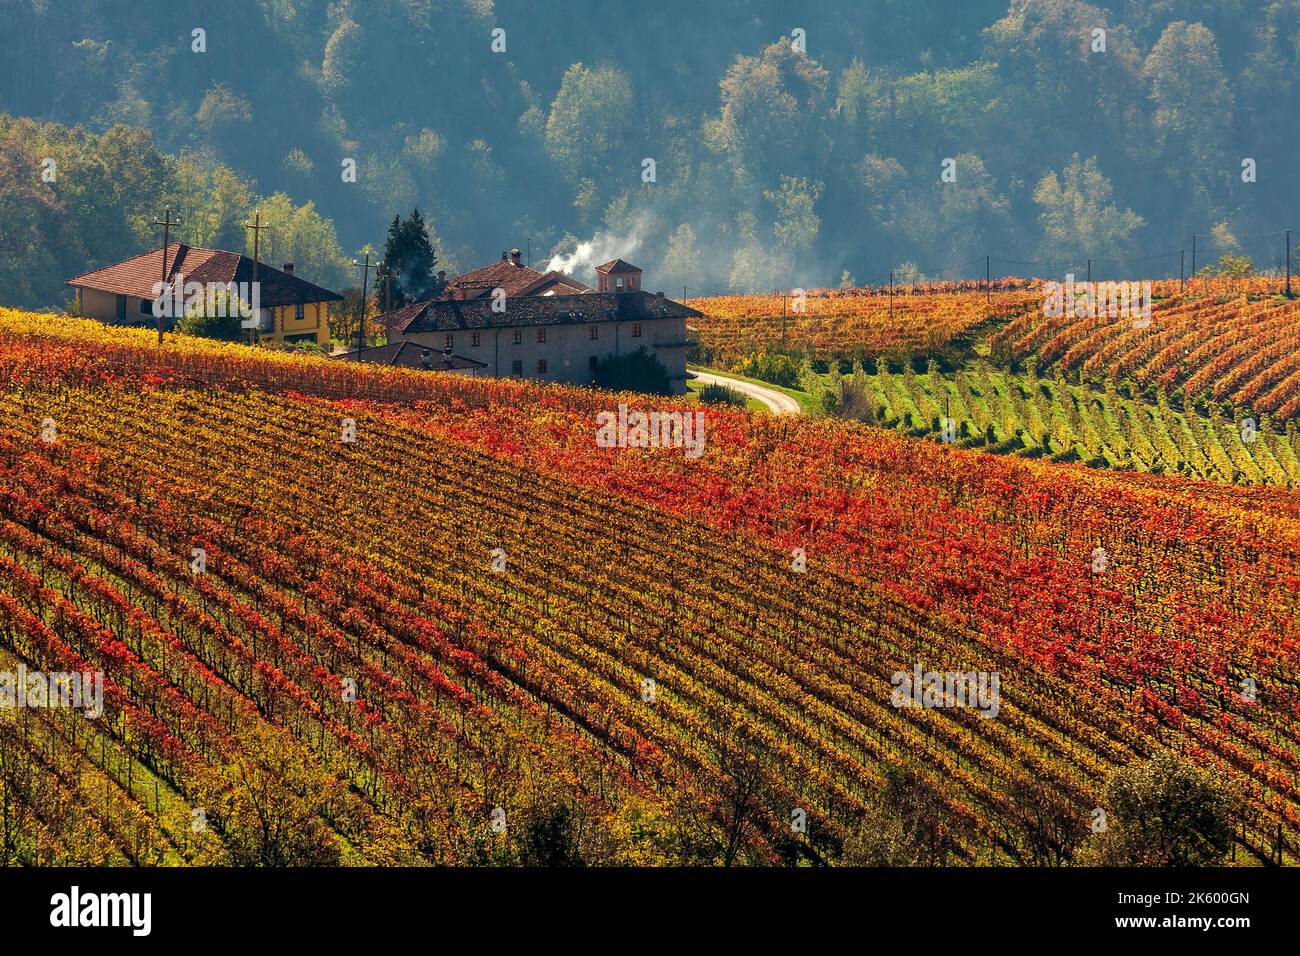 View from above of red and orange colorful autumnal vineyards in Piedmont, Northern Italy. Stock Photo